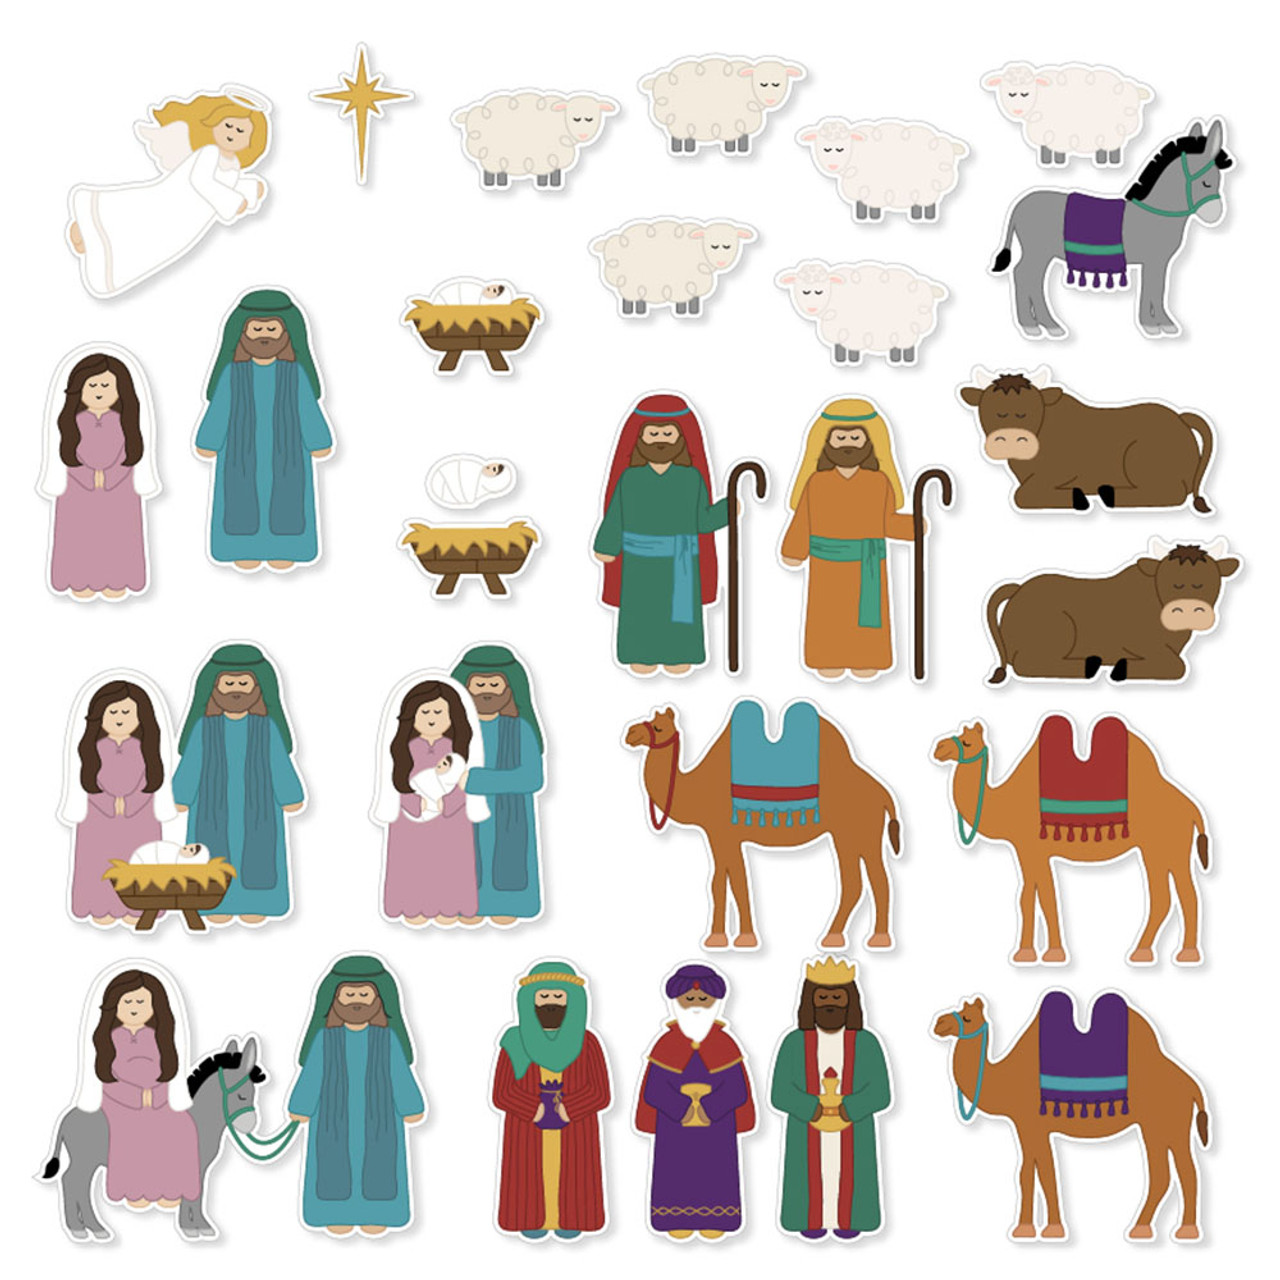 Christmas Nativity Images Download  Find images of christmas nativity